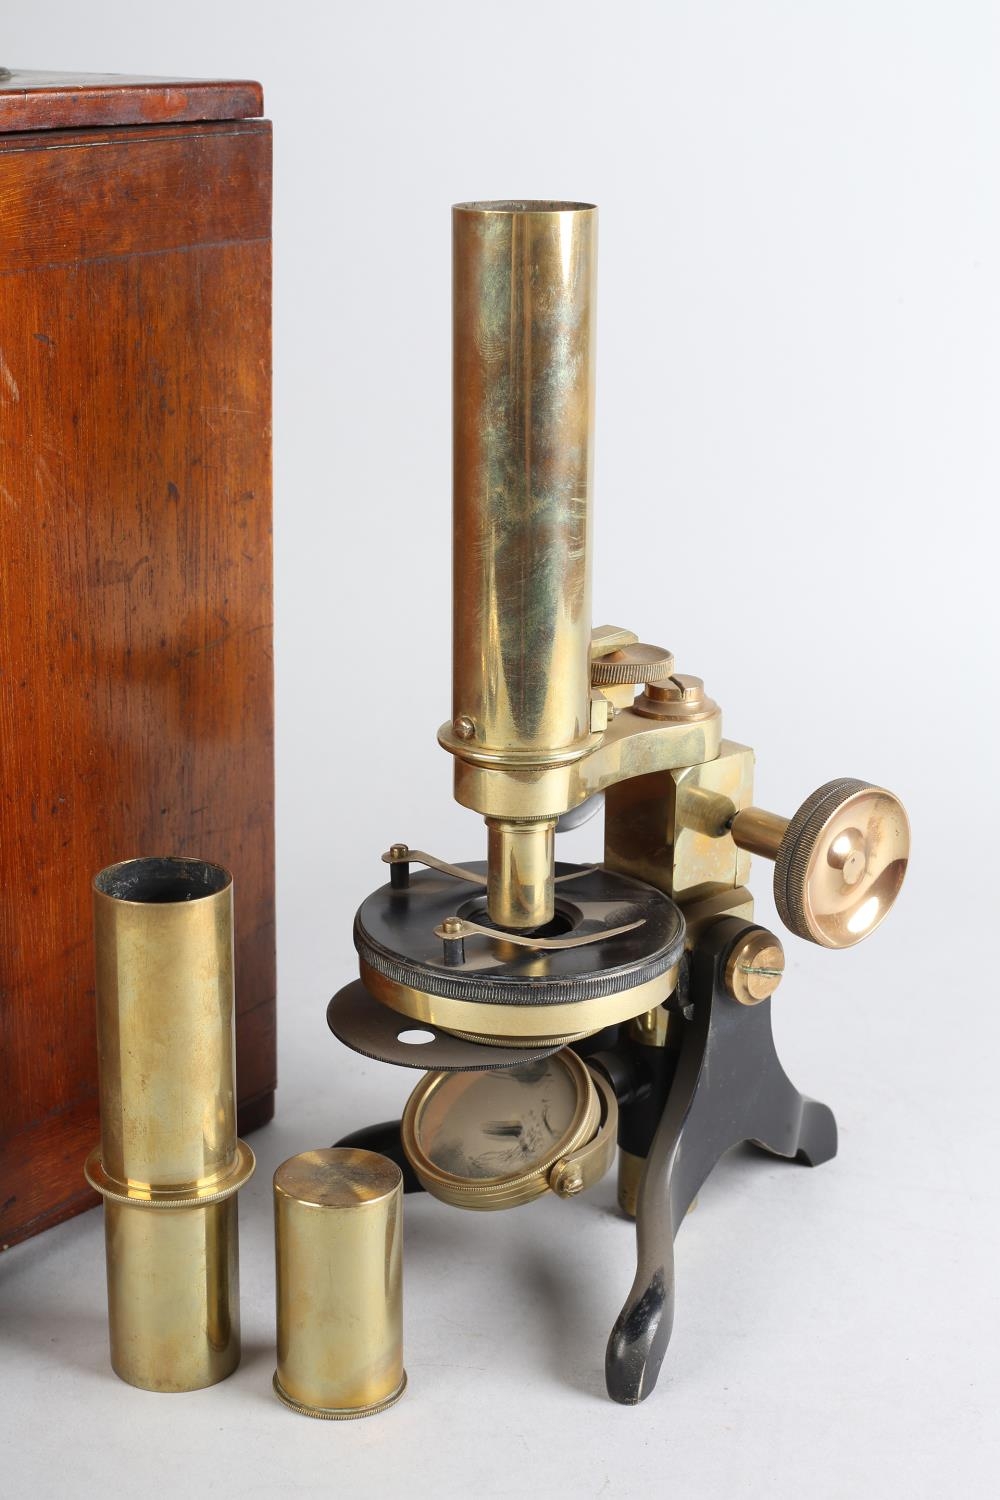 A VICTORIAN BRASS MICROSCOPE BY H HUGHES & SON, 59 Fenchurch St, London, with additional lenses in a - Image 5 of 7